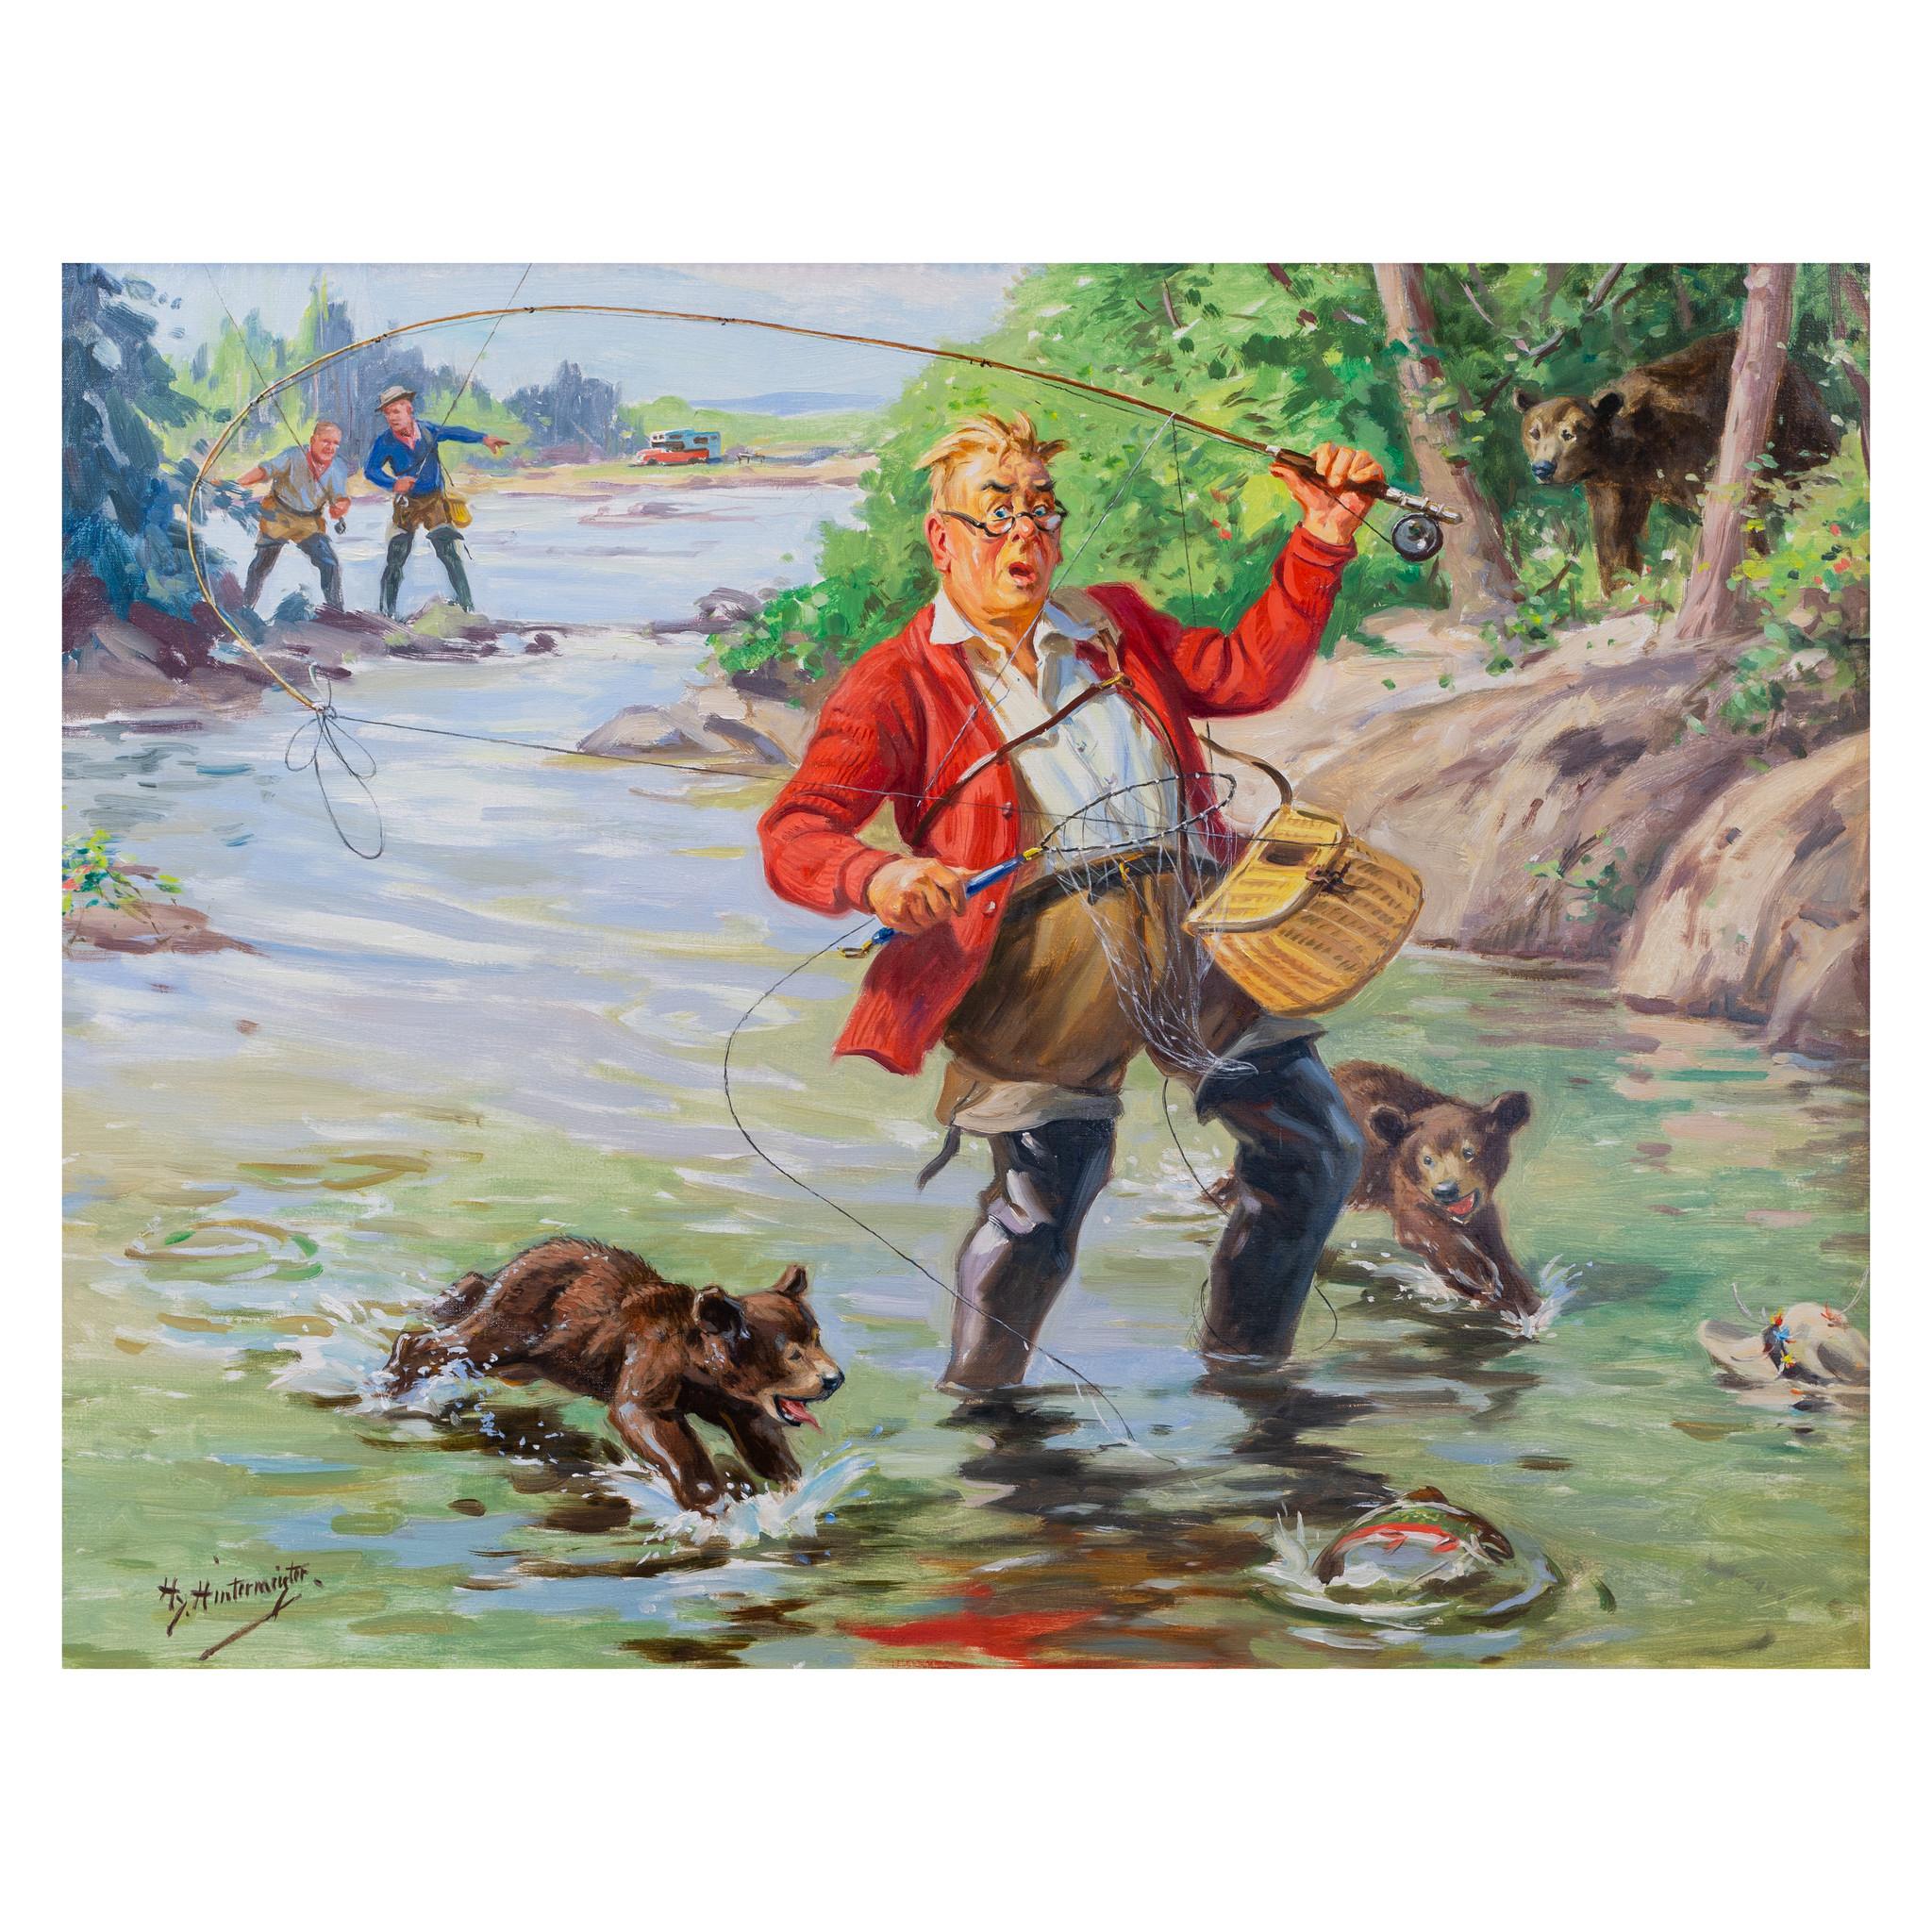 Oil on canvas by Hy Hintermeister 1897-1972. From the archives of the Shaw Barton Calendar company. Used for early calendar print. Part of the humorous fishing series he started. 27”x 22”. Well framed.

Henry Hintermeister was born in 1897 in New